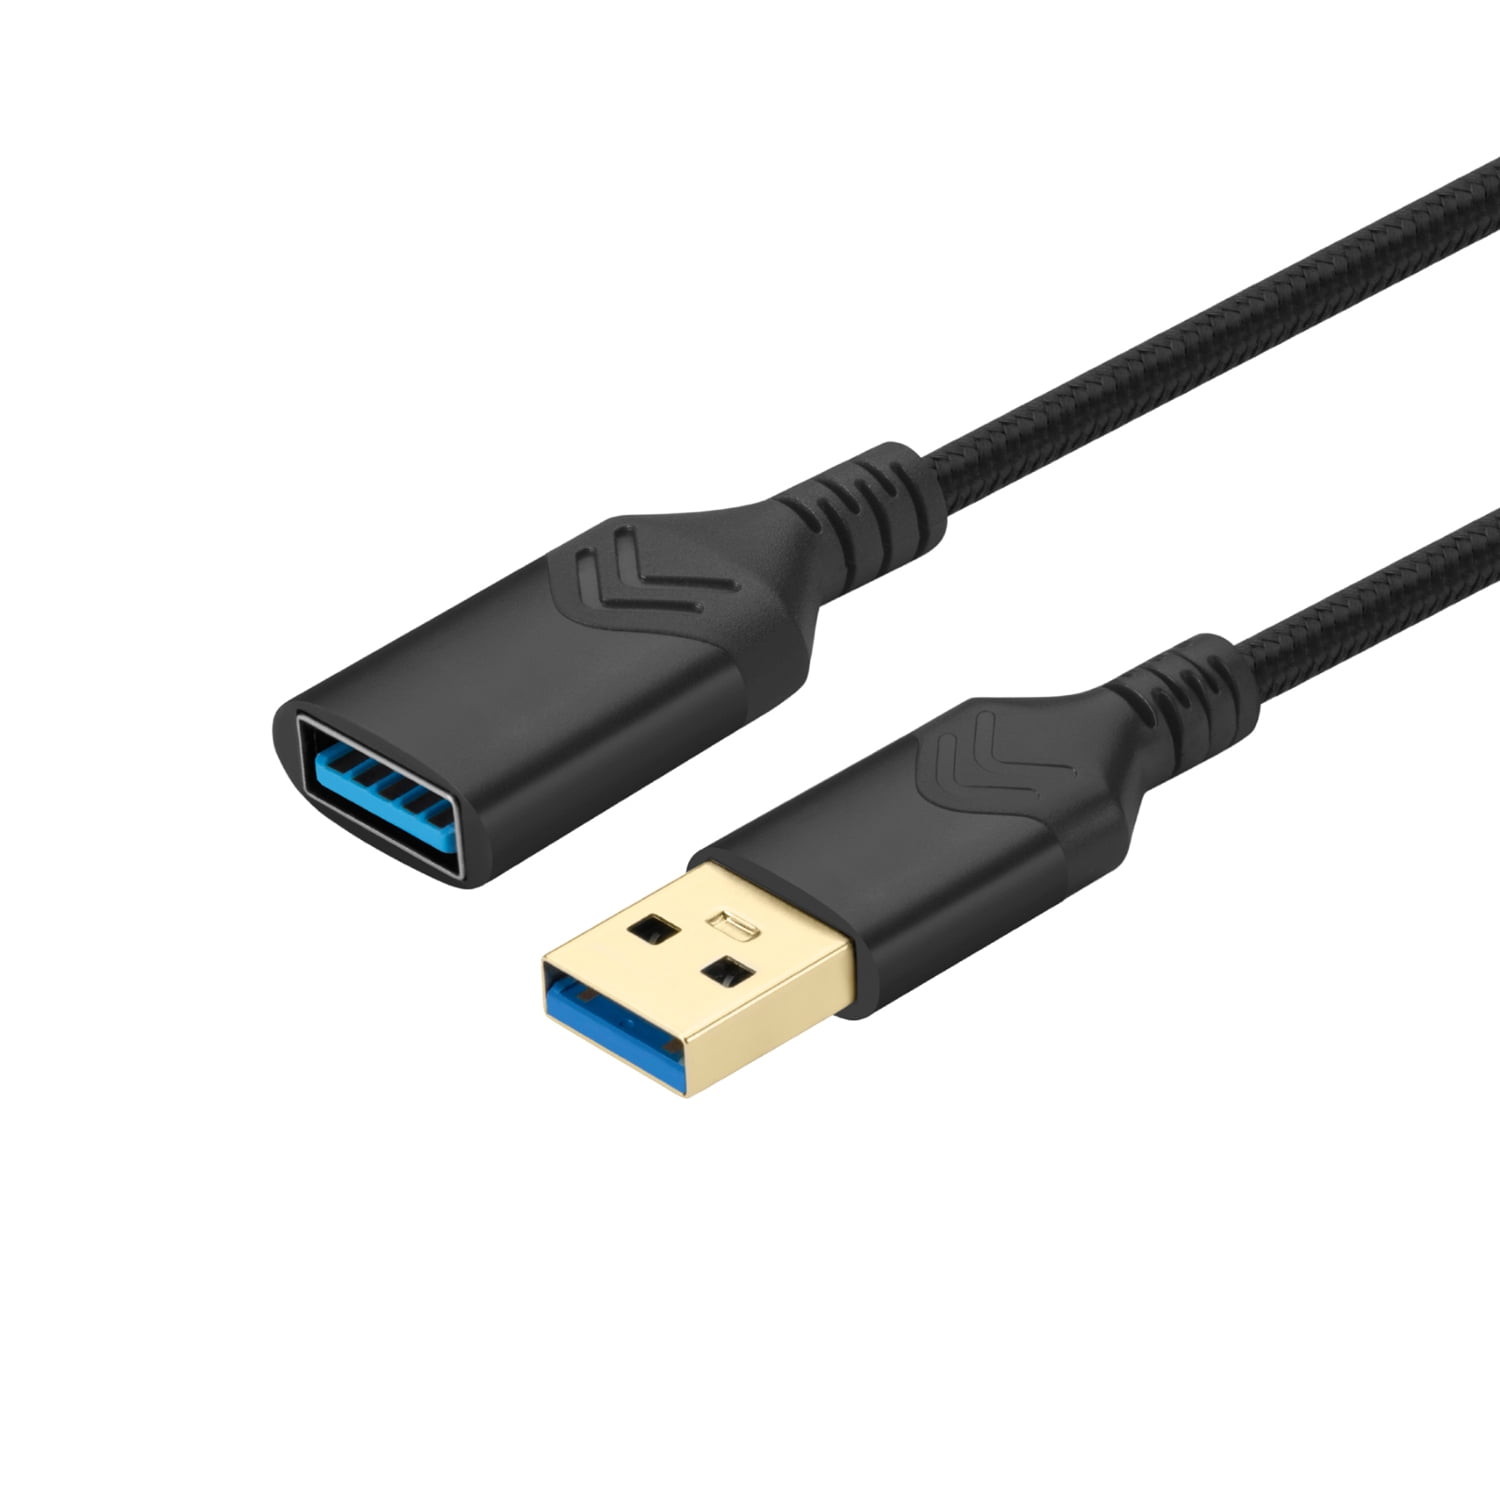 OMNIHIL 5FT USB 3.0 A to A Cable/Male to Male Cable Compatible with Beelink U57 Mini PC